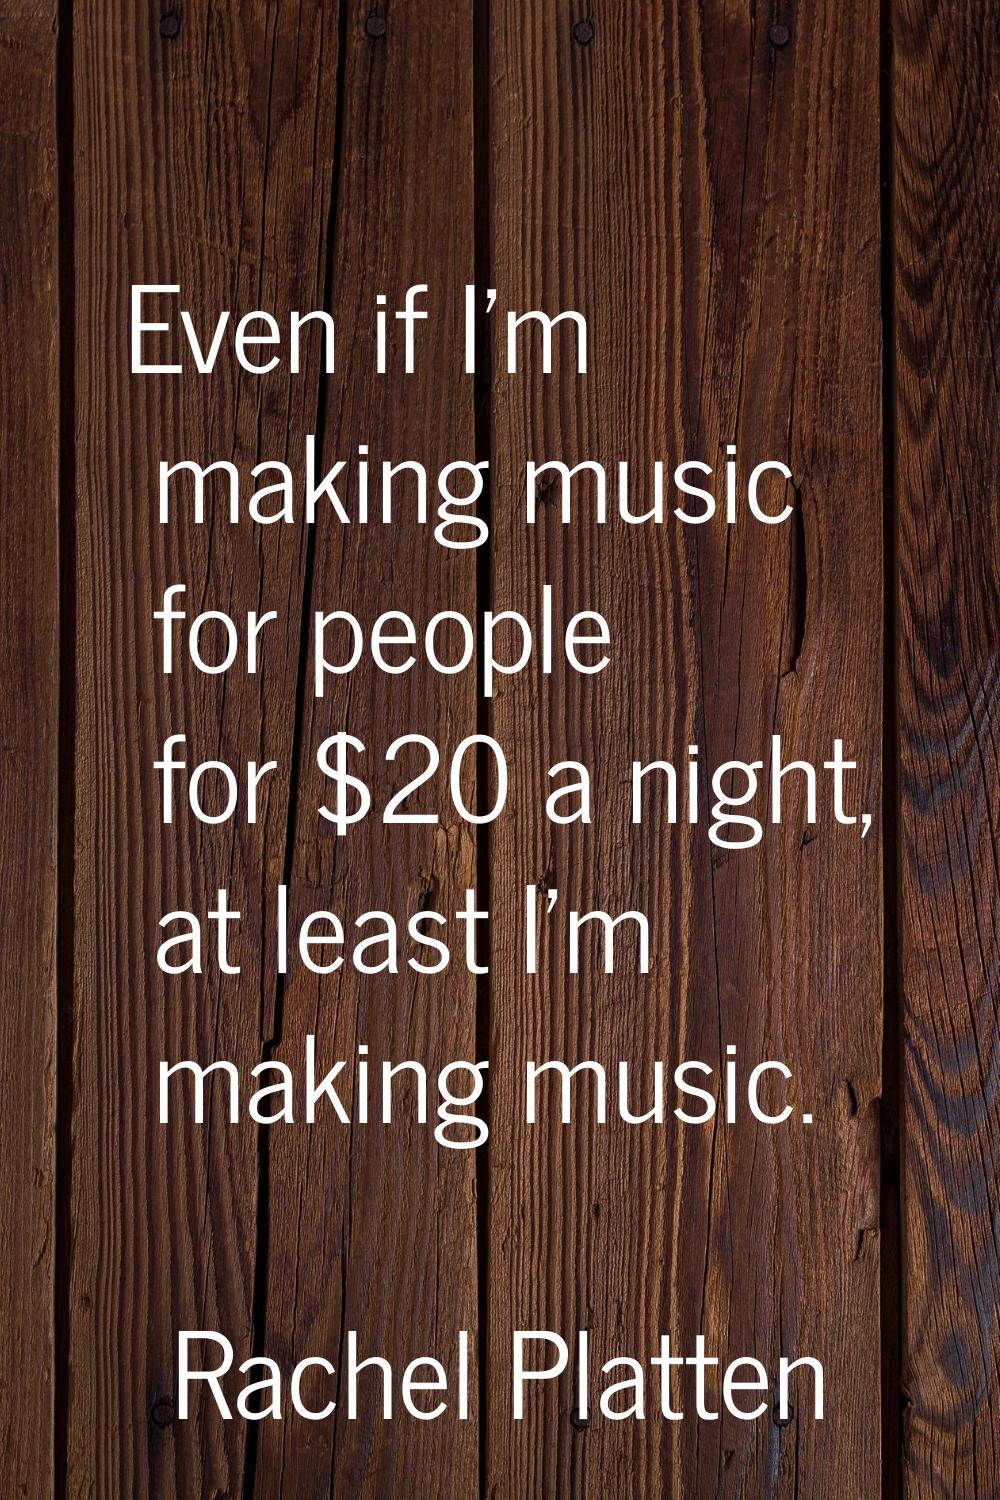 Even if I'm making music for people for $20 a night, at least I'm making music.